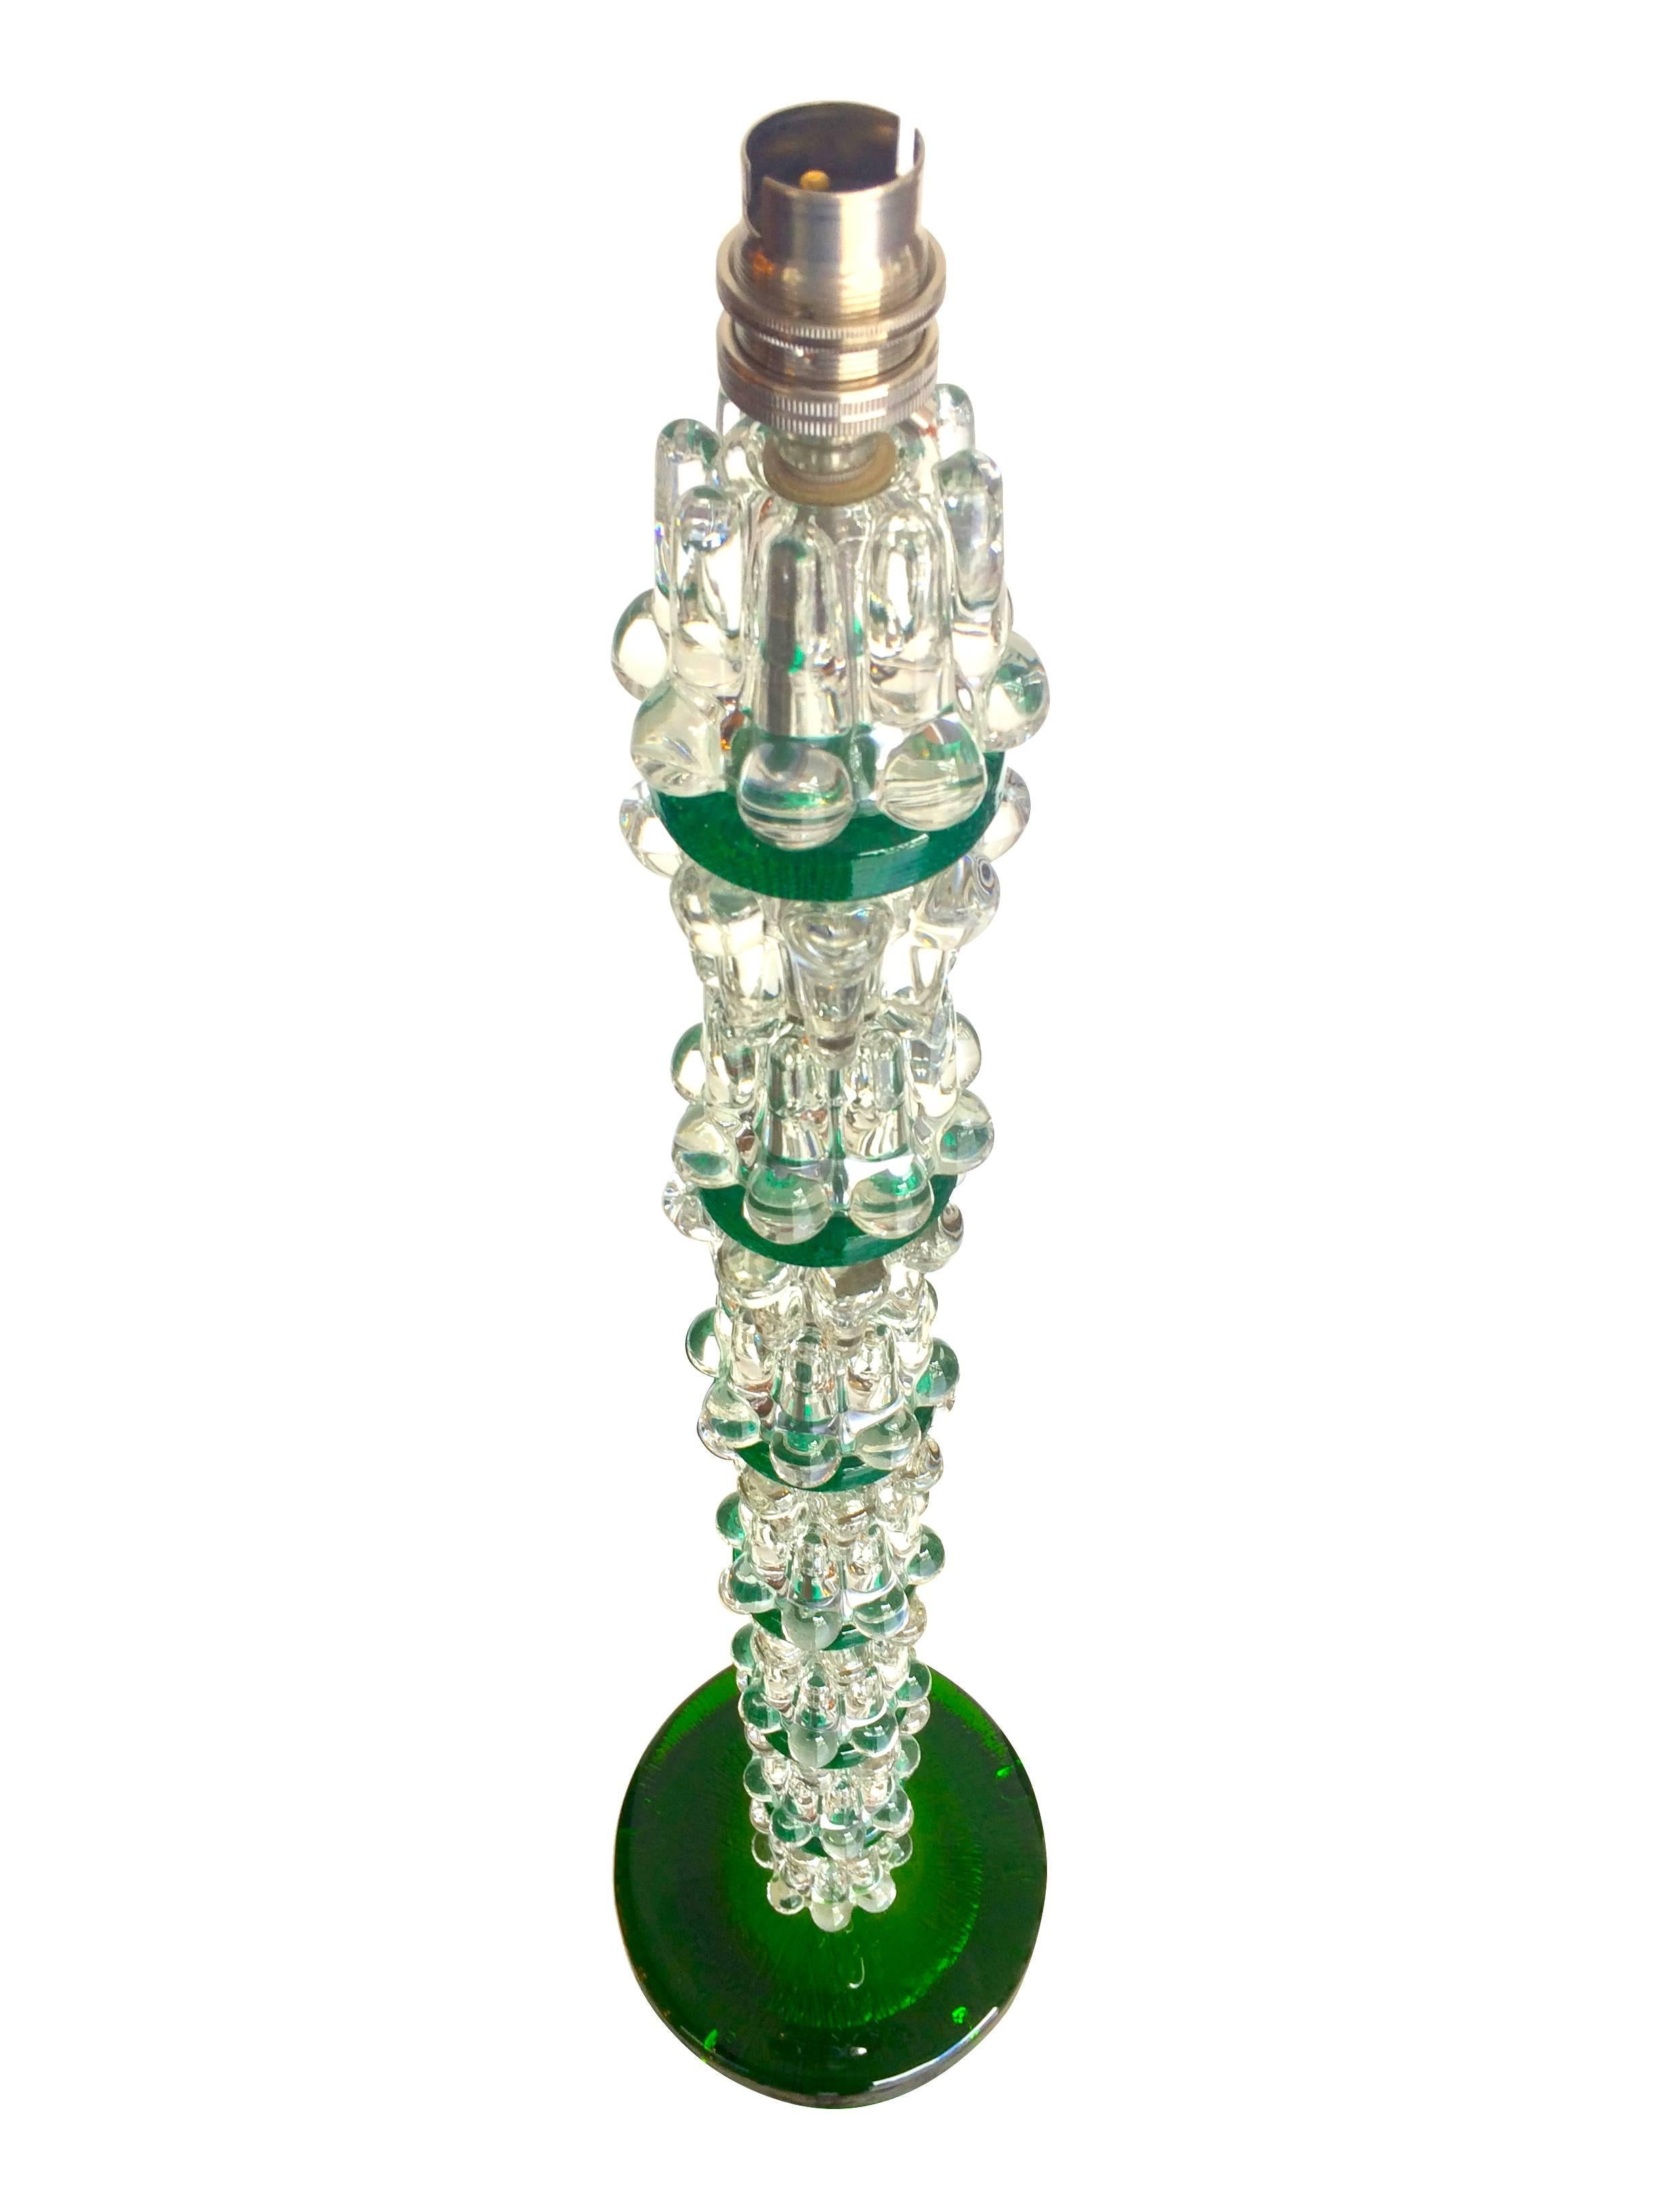 A large pair of green Orrefors glass lamps with clear and green glass stem on a green glass base with single nickel fitting on each, rewired with antique silver cord flex and PAT tested.